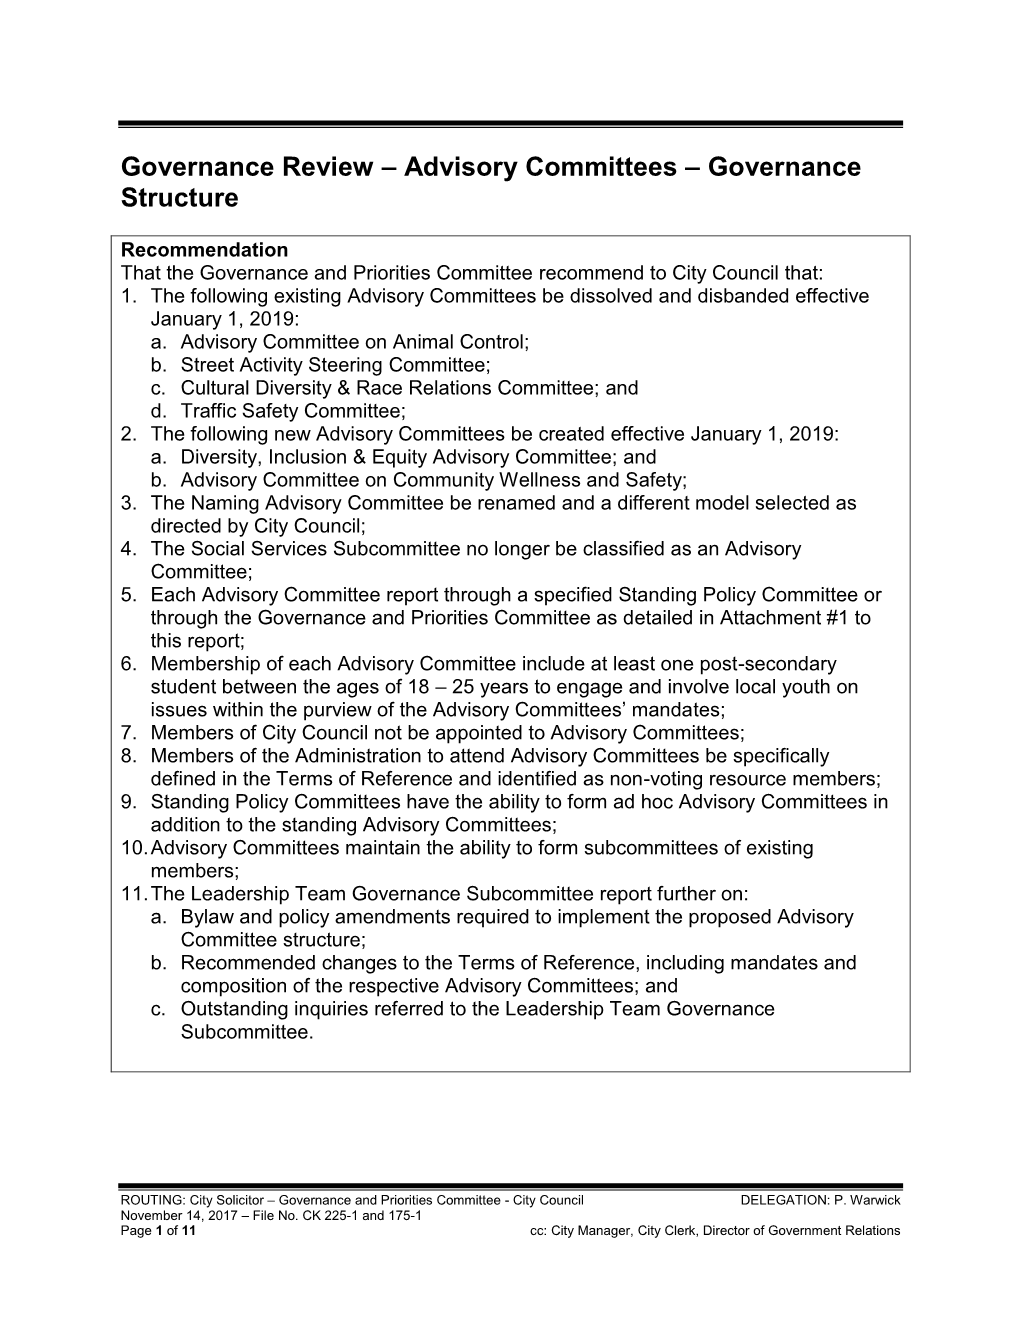 Advisory Committees – Governance Structure